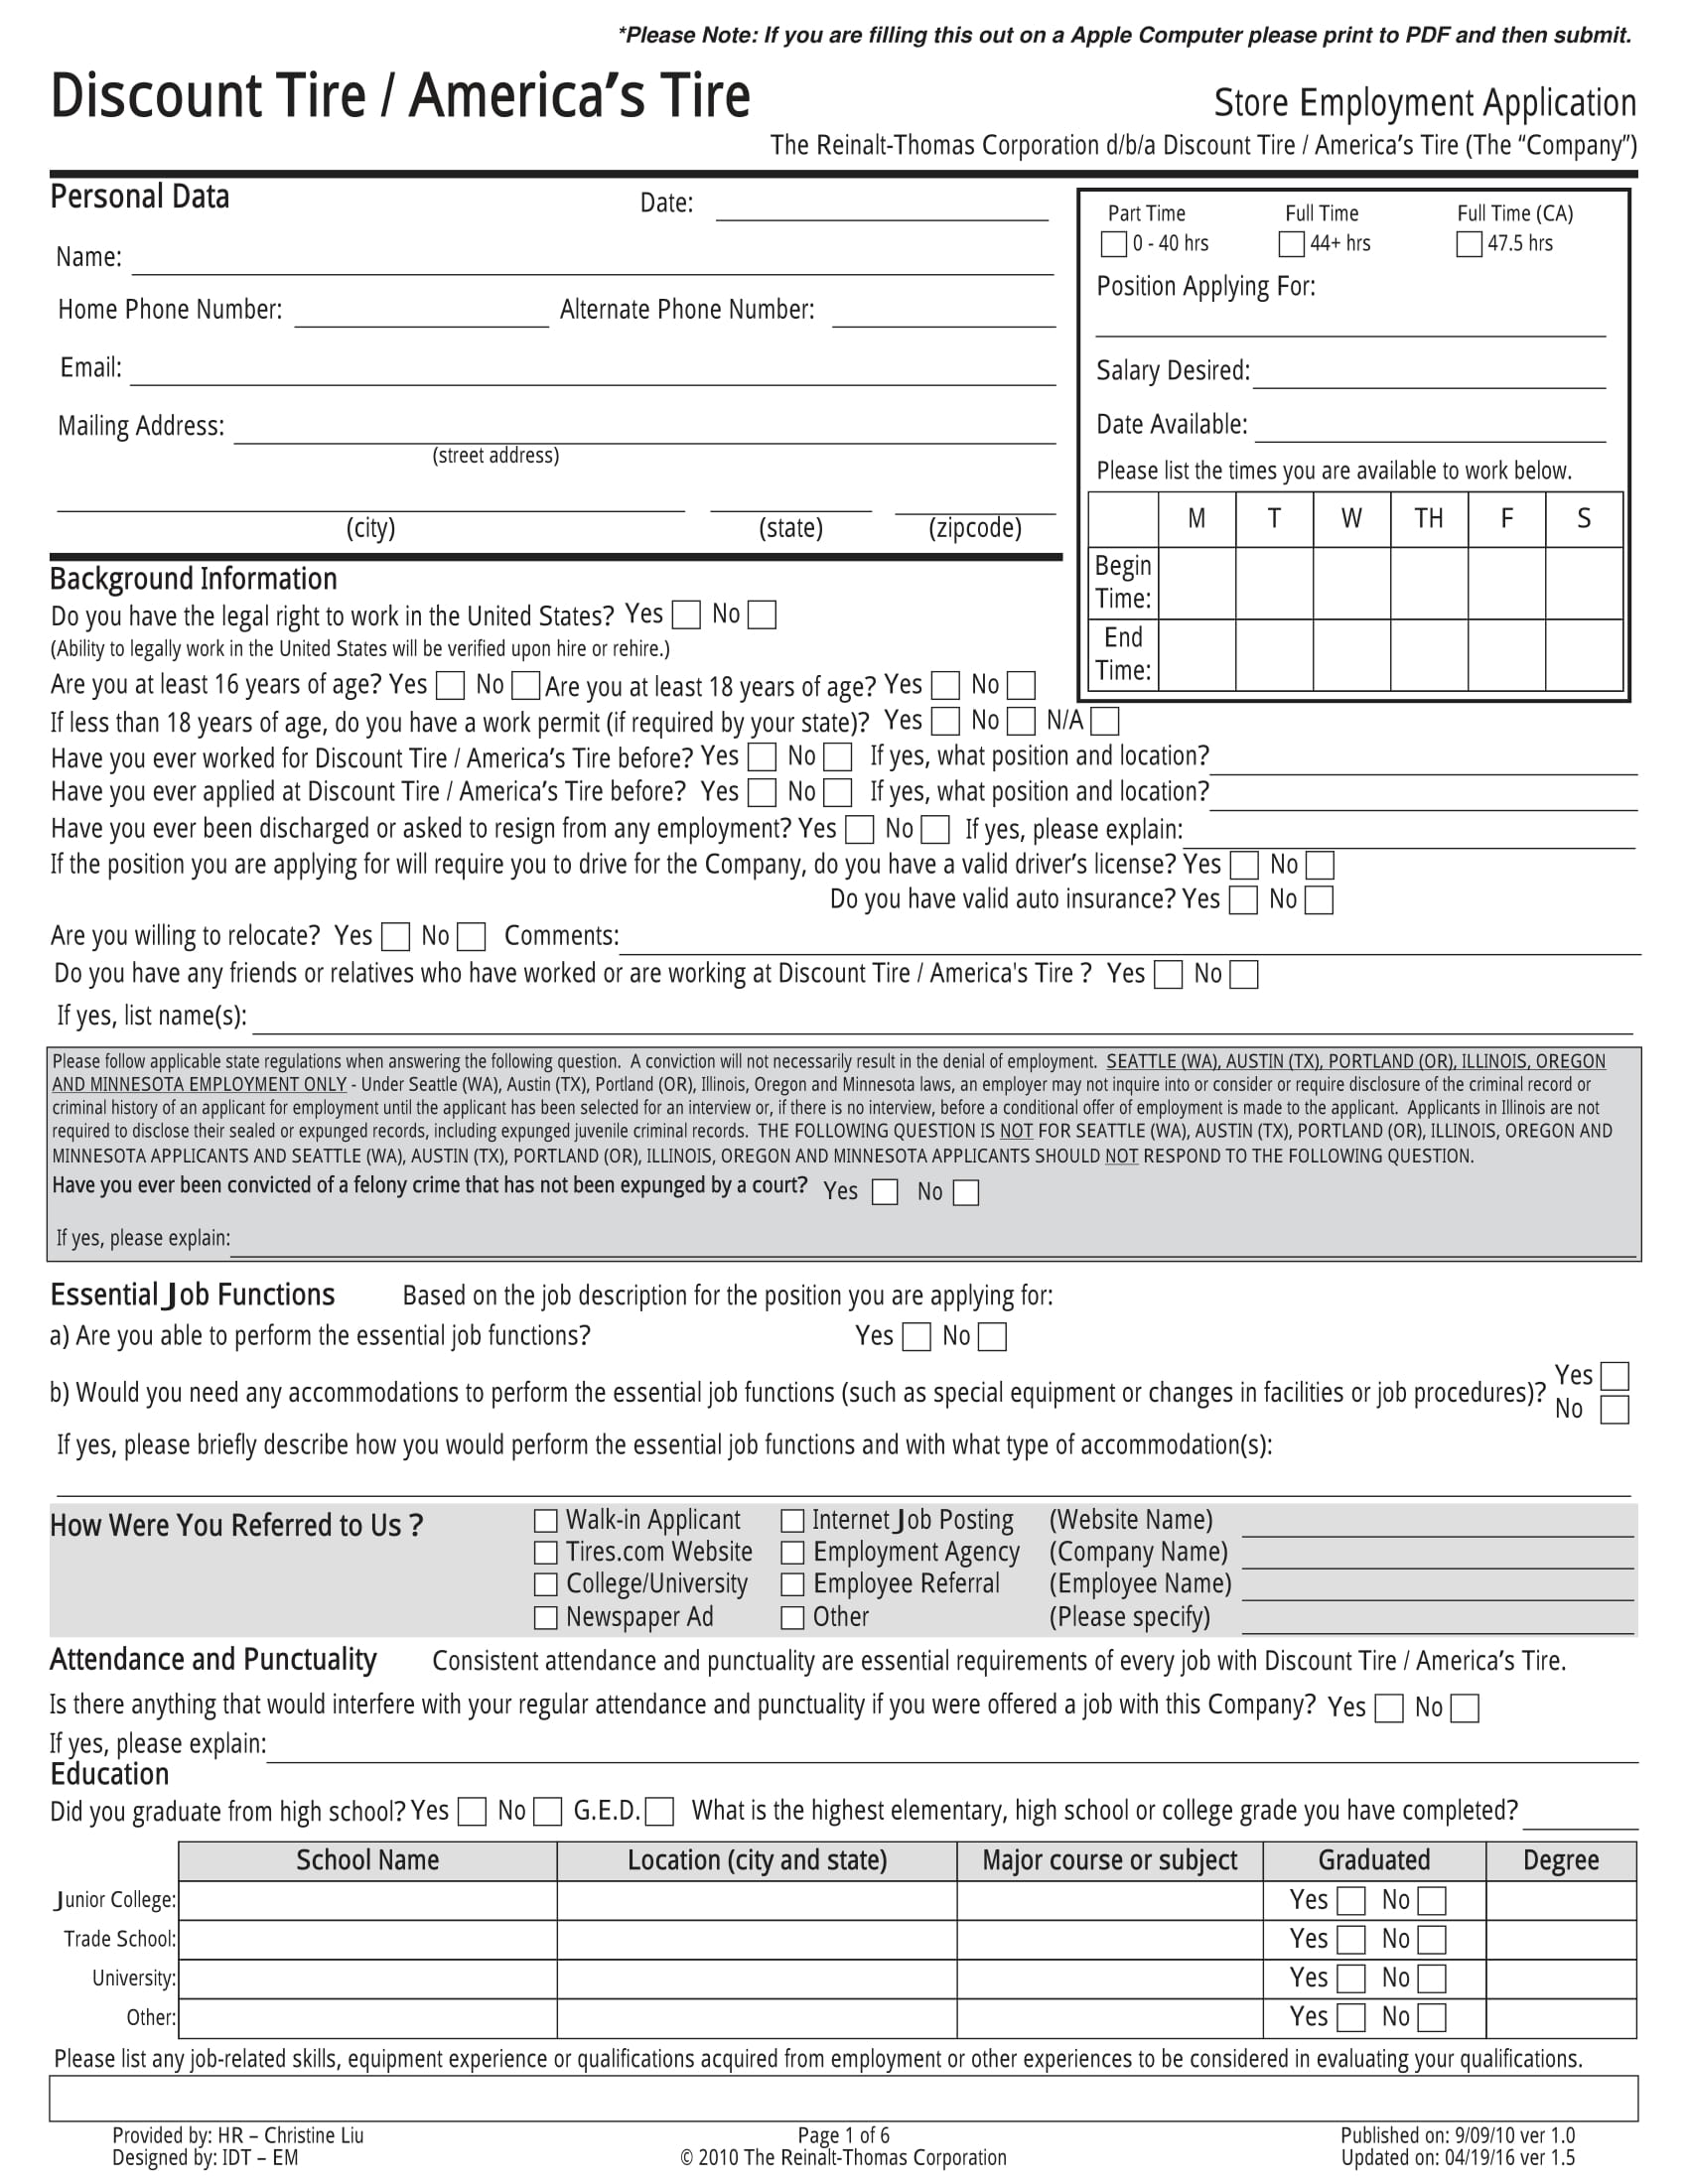 store employment application form 1